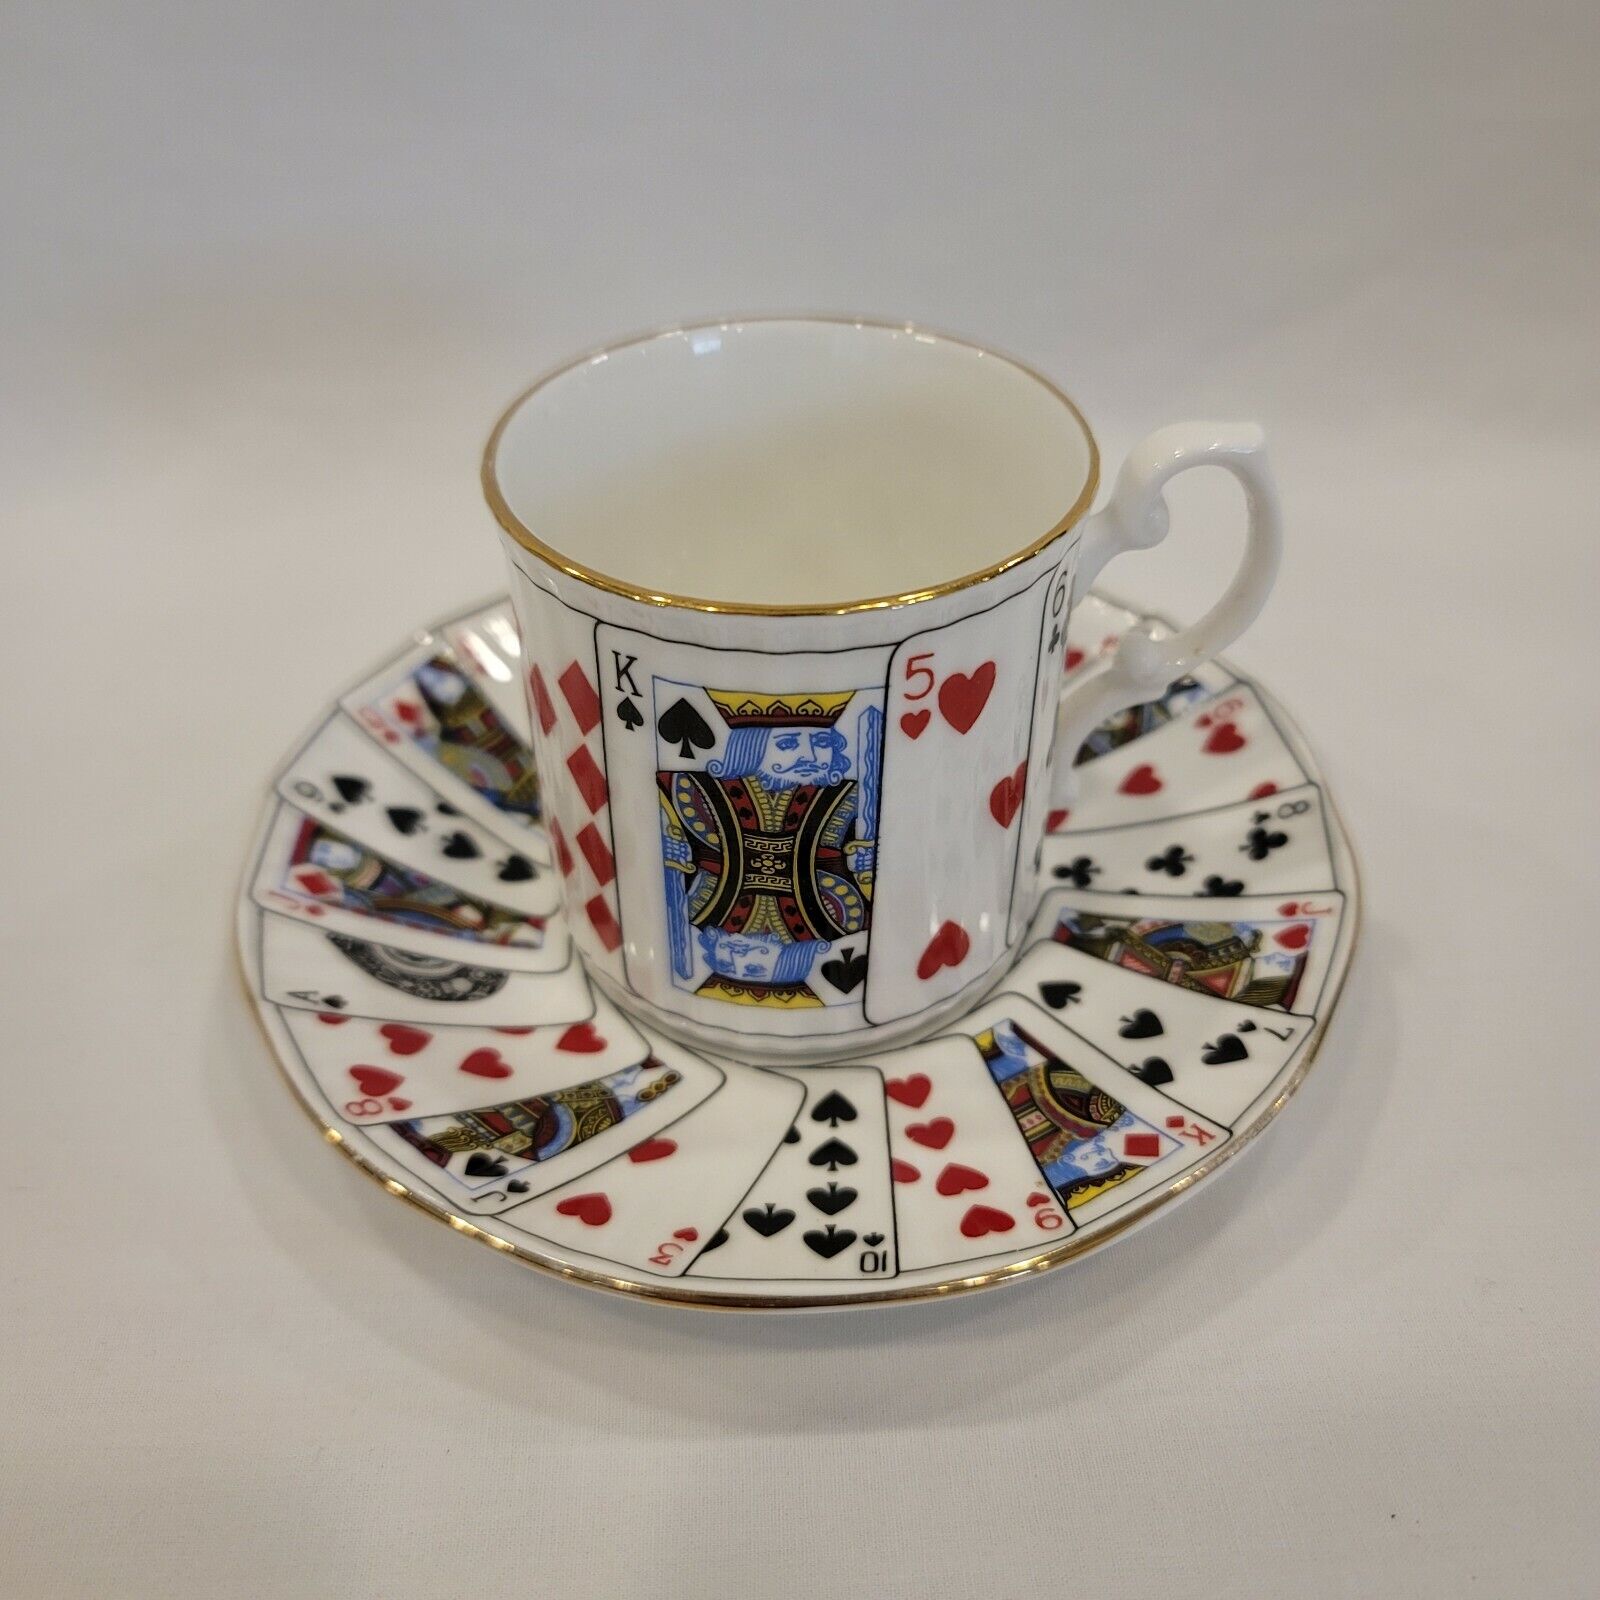 Elizabethan Staffordshire England China Cup Saucer Cut For Coffee Playing Cards